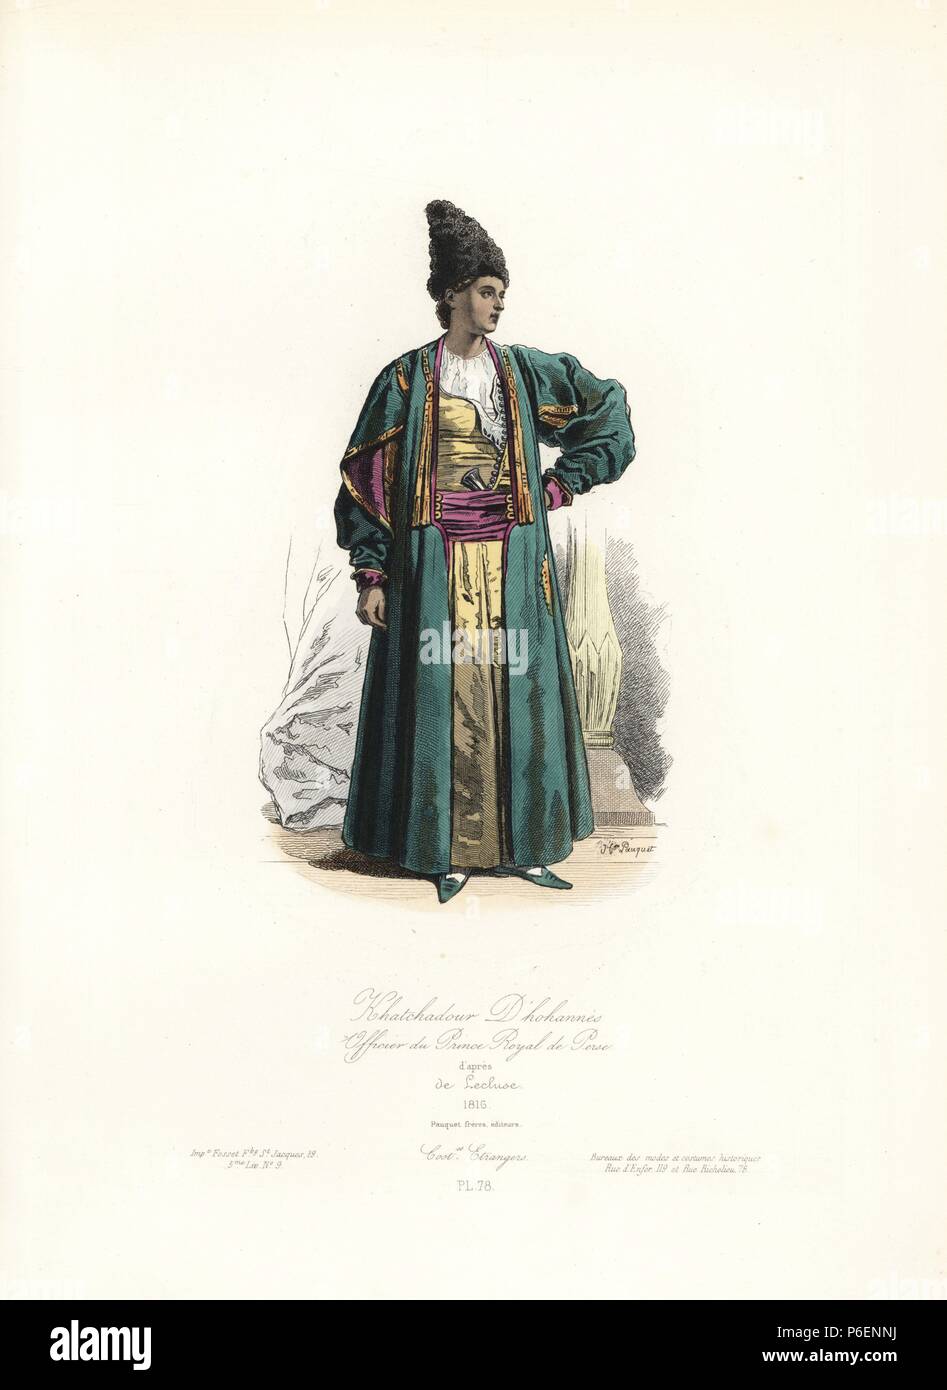 Khatchadour D'hohannes, officer of the Prince Royal of Persia, 1816, after de Lecluse. Handcoloured steel engraving by Hippolyte Pauquet from the Pauquet Brothers' "Modes et Costumes Etrangers Anciens et Modernes" (Foreign Fashions and Costumes Ancient and Modern), Paris, 1865. Hippolyte (b. 1797) and Polydor Pauquet (b. 1799) ran a successful publishing house in Paris in the 19th century, specializing in illustrated books on costume, birds, butterflies, anatomy and natural history. Stock Photo